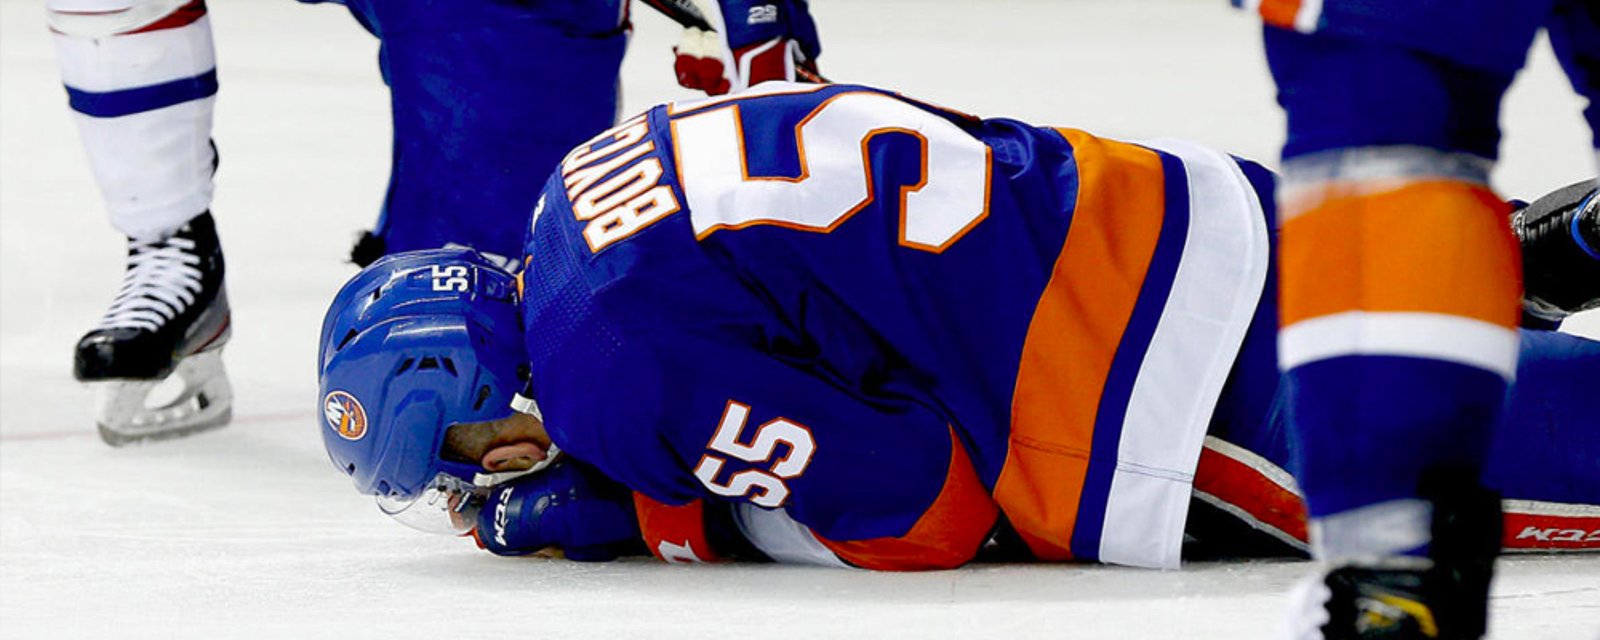 Lamoriello provides an official update on Boychuk after scary skate cut injury